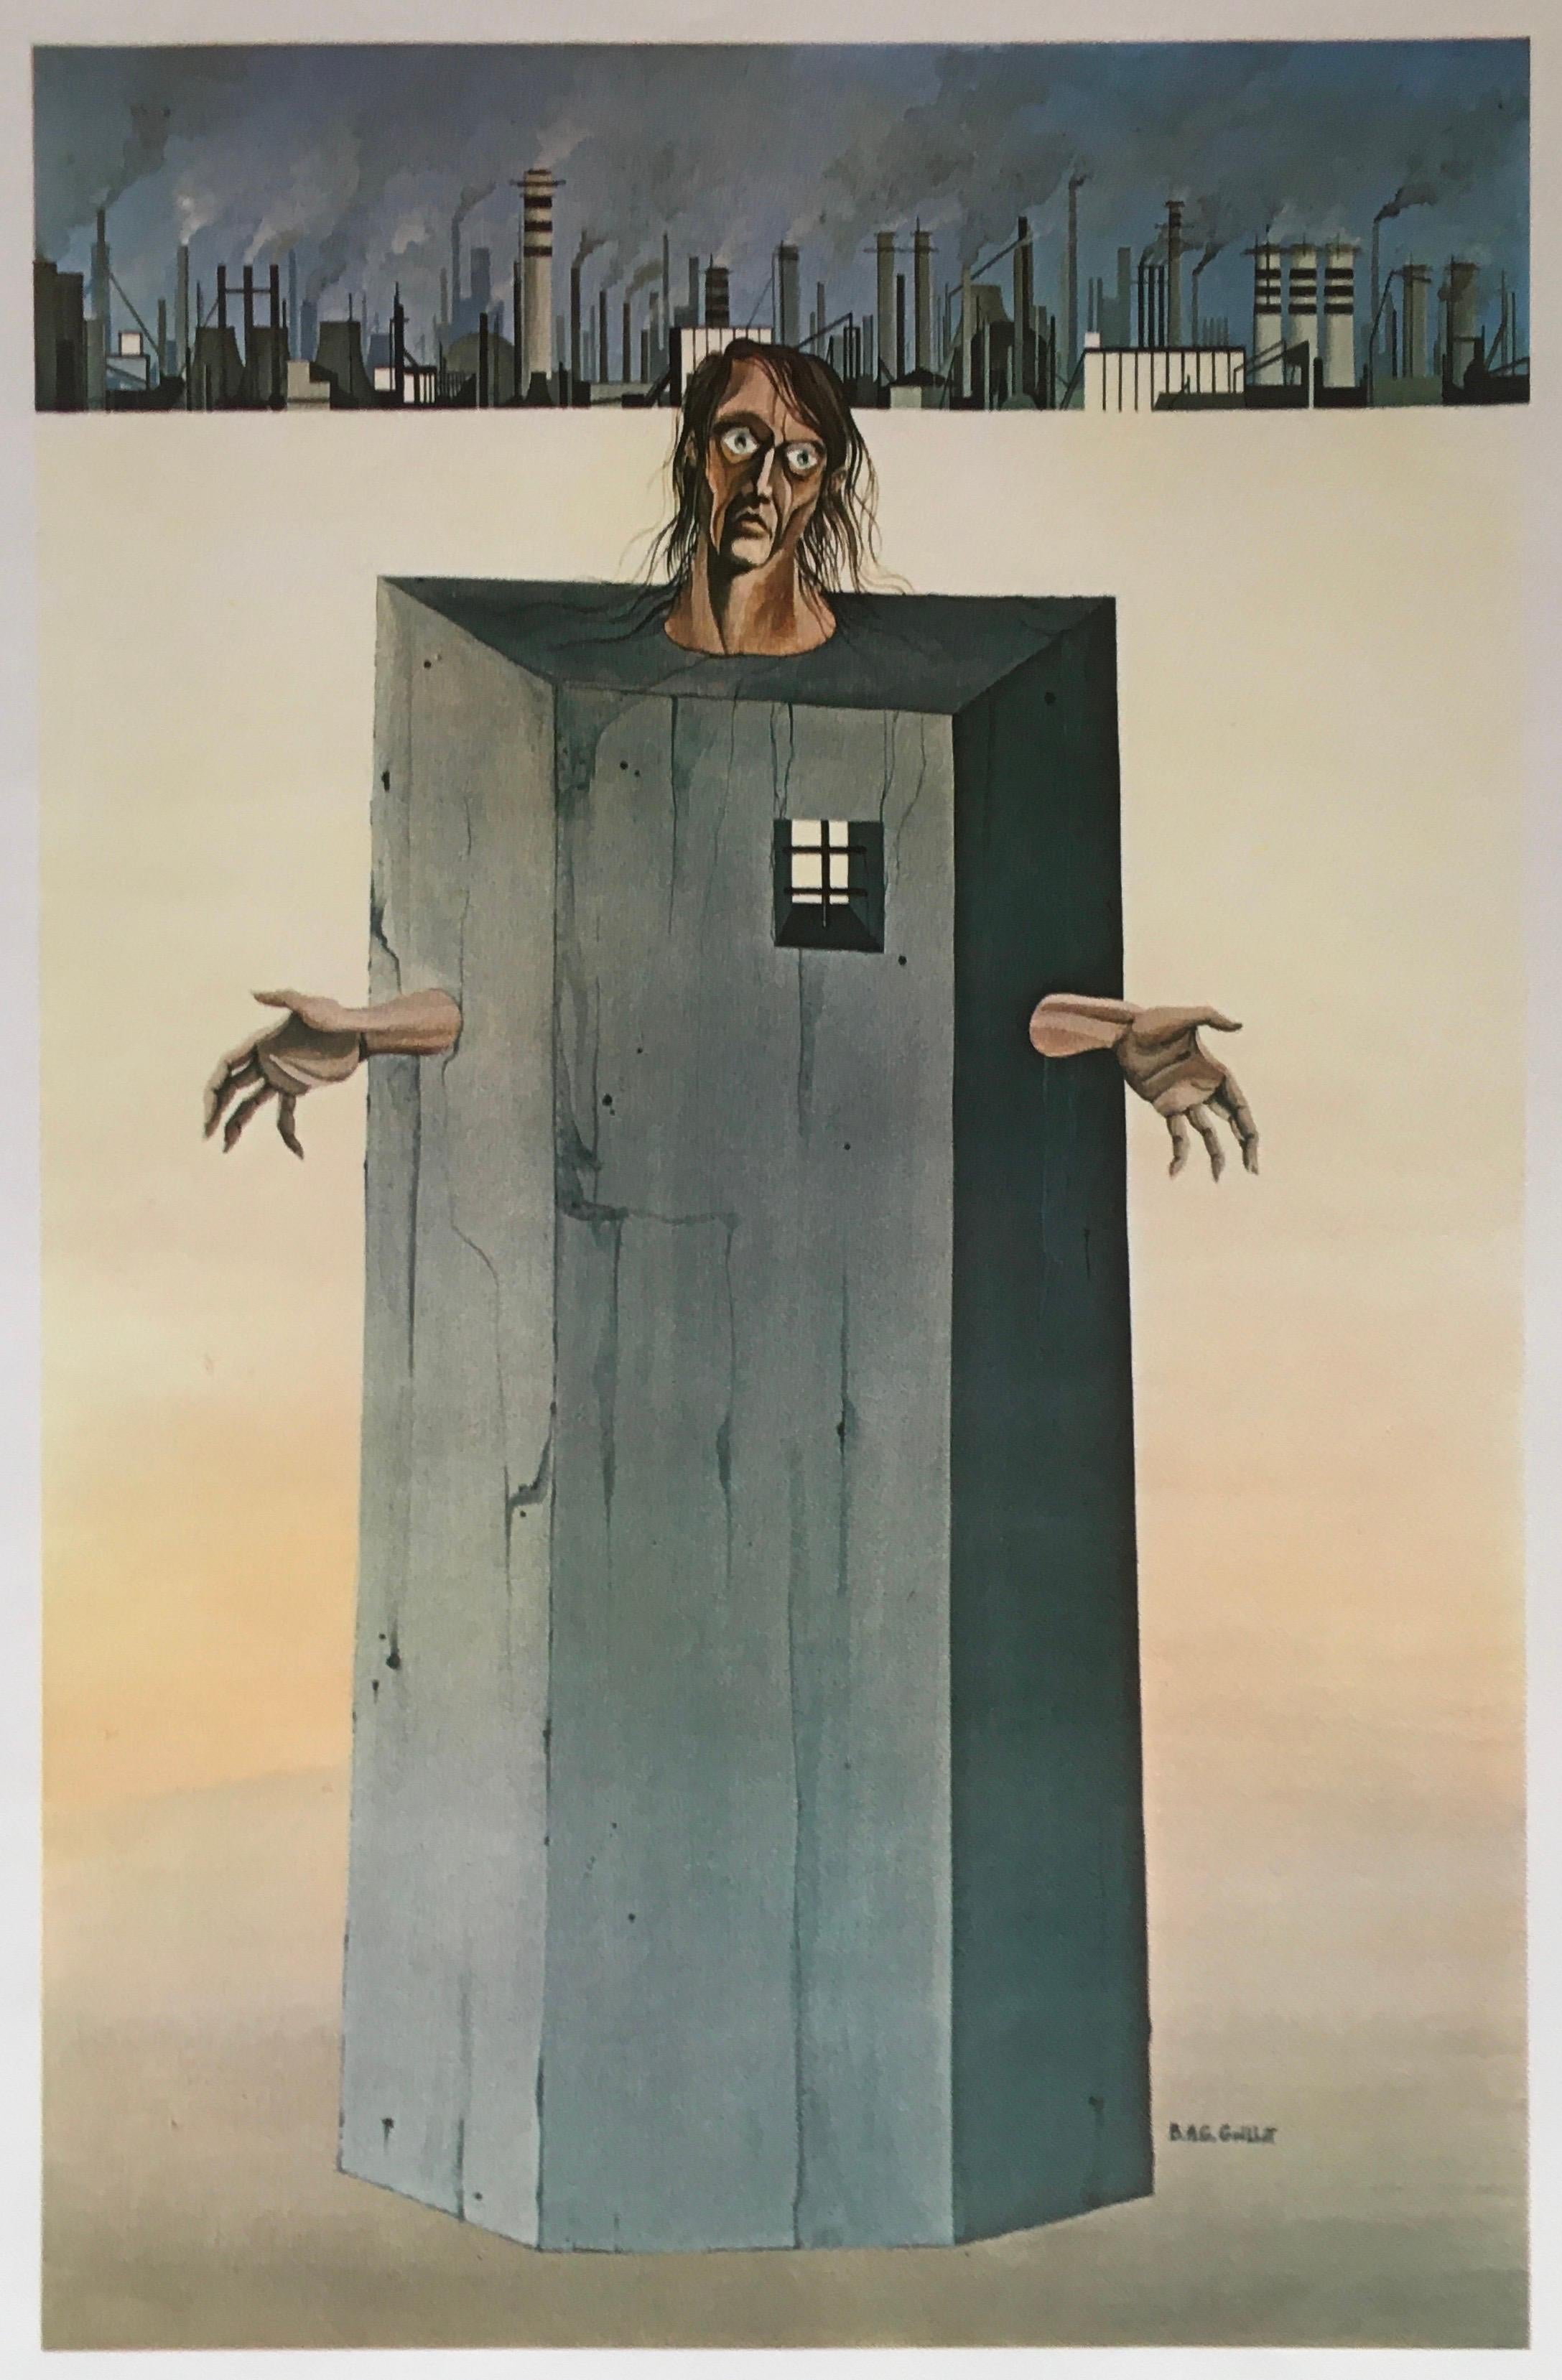 Original mid-century art poster depicting the interesting work by listed French artist, B.A.G. Guillot who was a skilled surrealist. 
B.A.G. Guillot art posters and other creations are in the manner of many works by Salvador Dali. 

We recommend